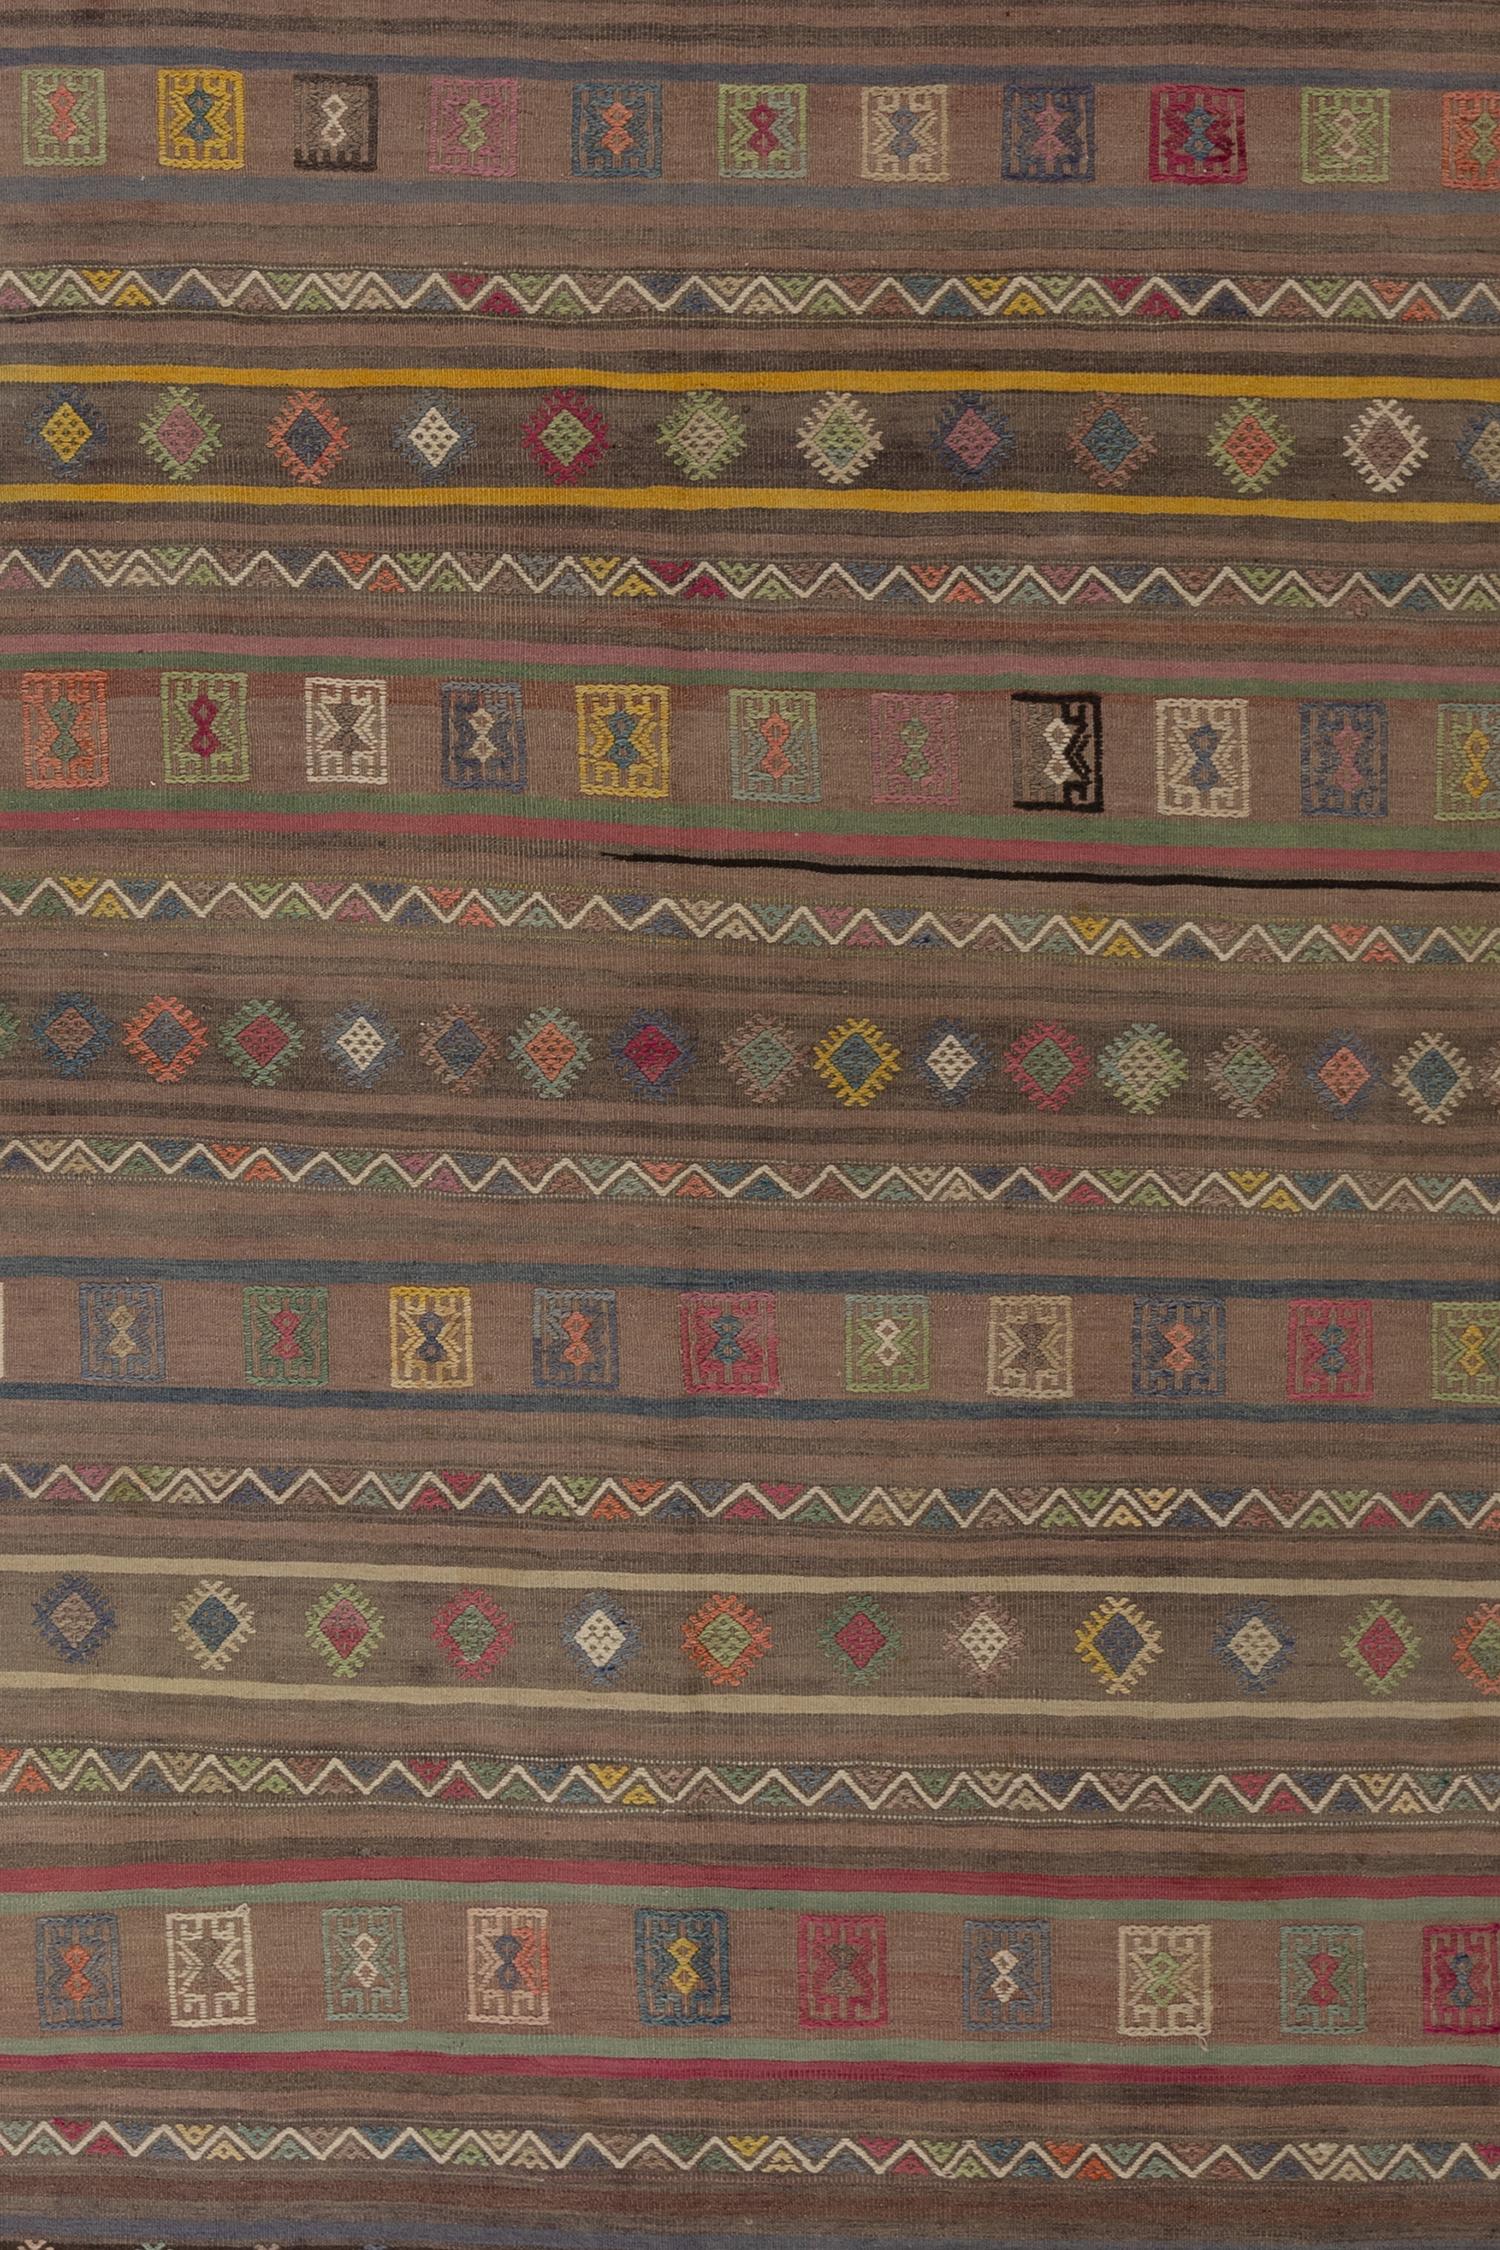 Age: Circa 1950

Colors: Brown, Yellow, Red, Pink, Green

Pile: low

Wear Notes: 5

Material: Wool on cotton

Wear Guide:
Vintage and antique rugs are by nature, pre-loved and may show evidence of their past. There are varying degrees of